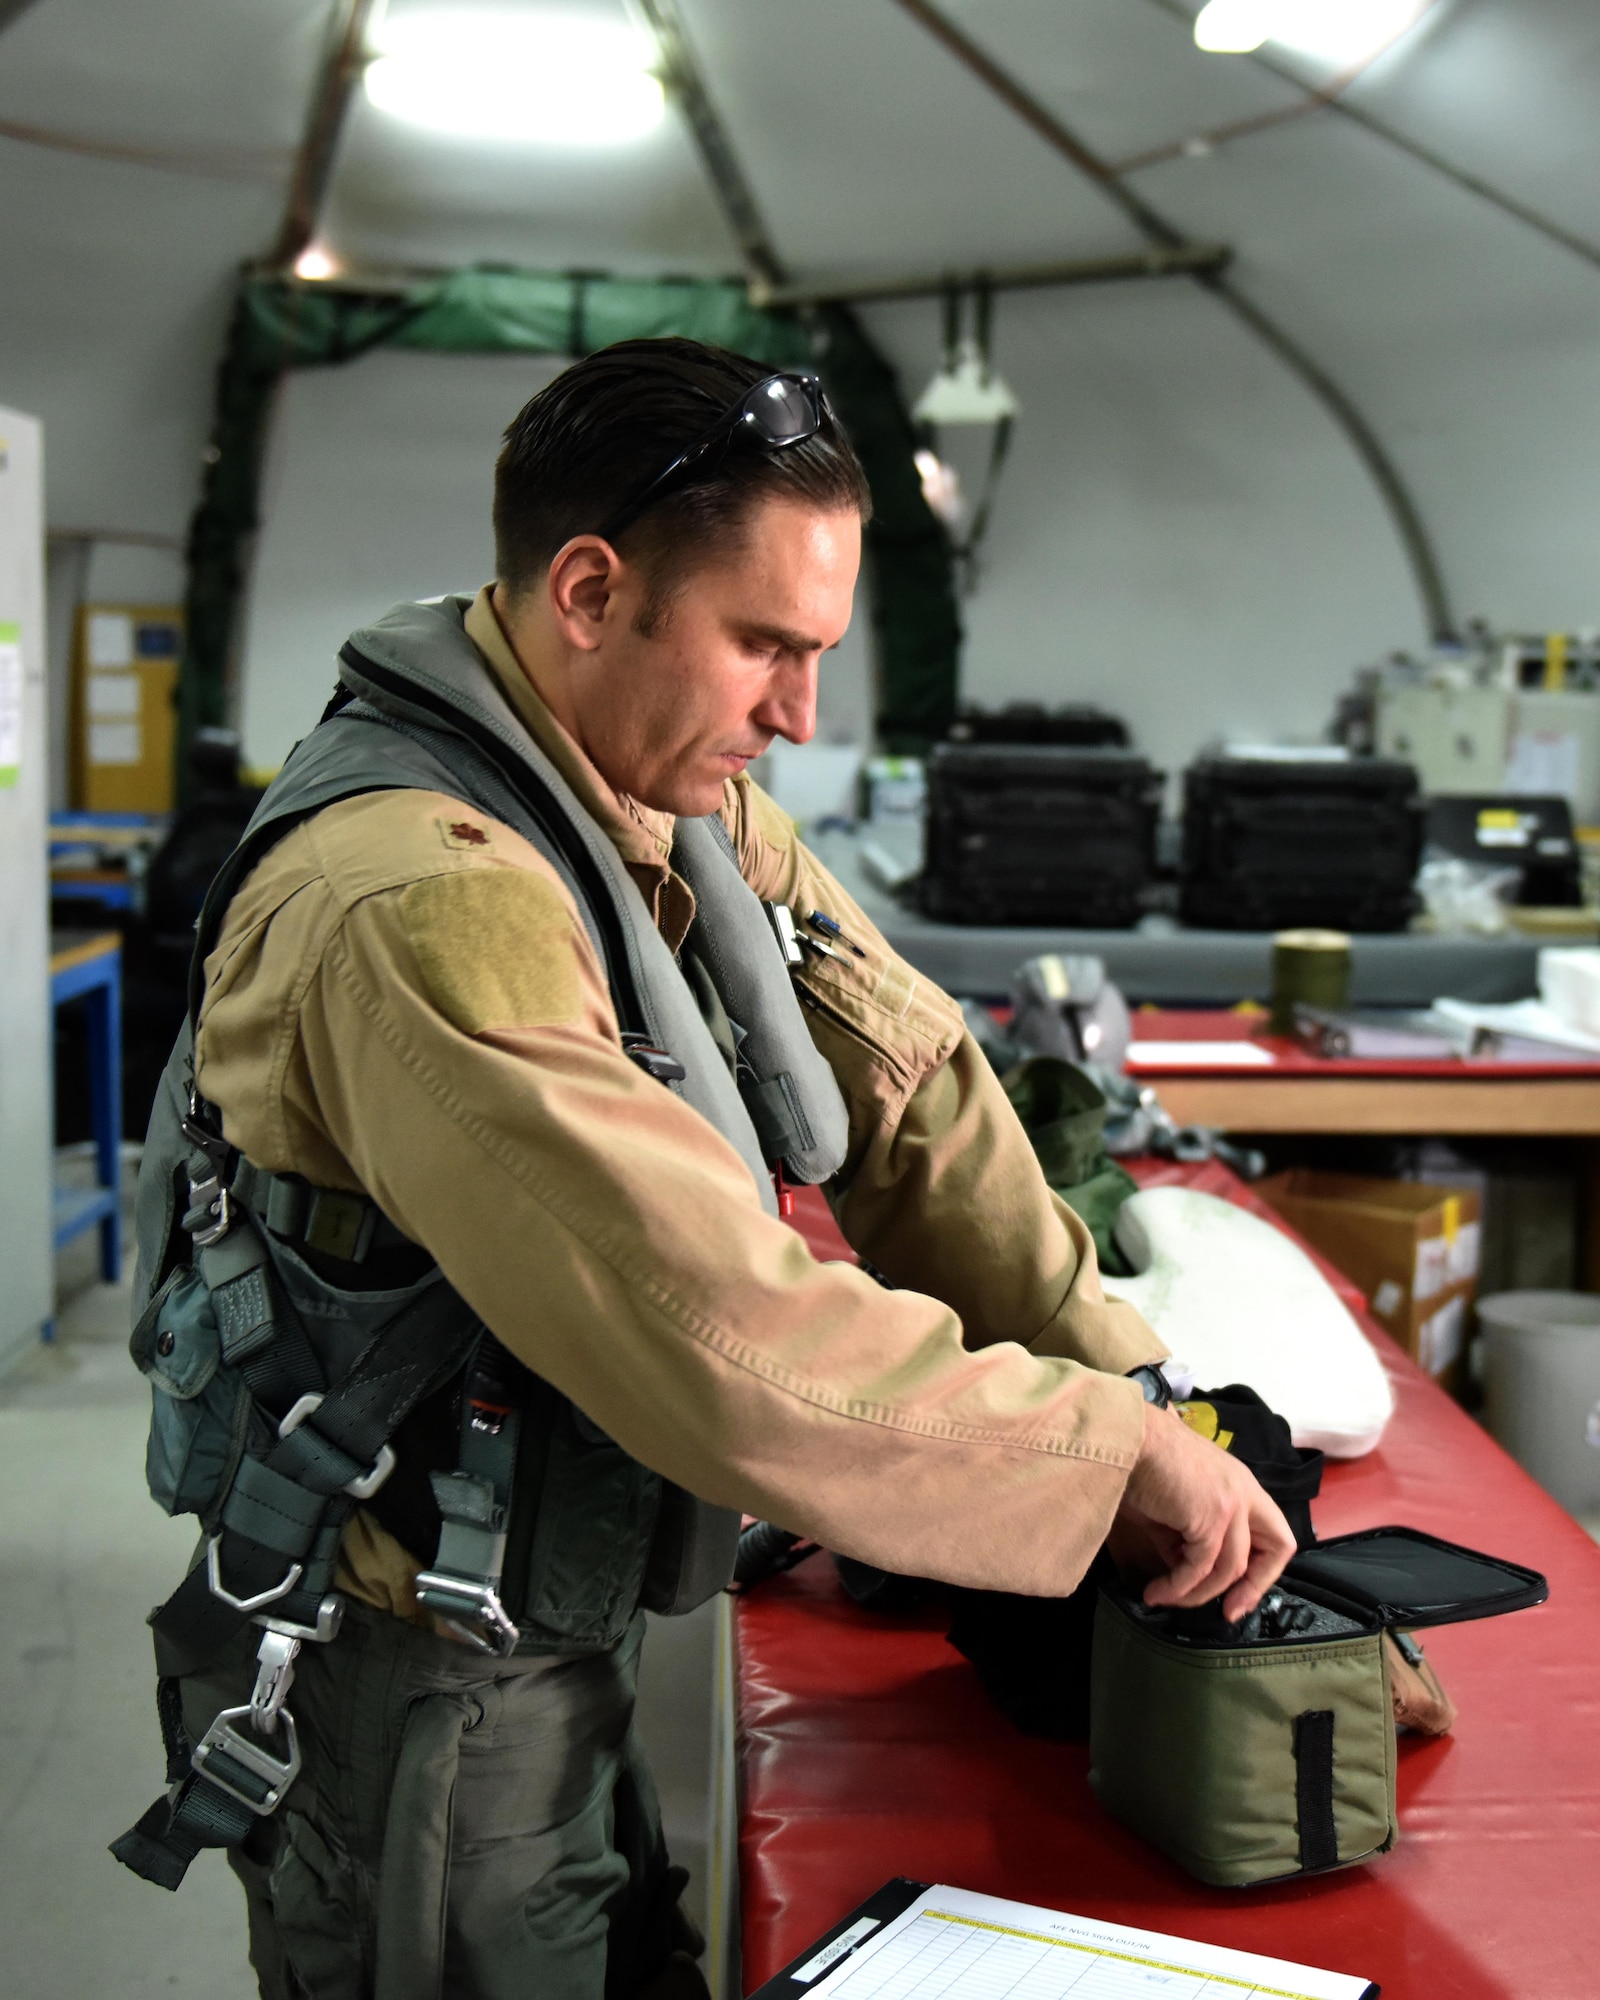 Maj. “Bullet,” F-22 Raptor pilot with the 27th Expeditionary Fighter Squadron, prepares his equipment prior to flight in support of Combined Joint Task Force-Operation Inherent Resolve at Al Dhafra Air Base, United Arab Emirates, Sept. 22, 2017.